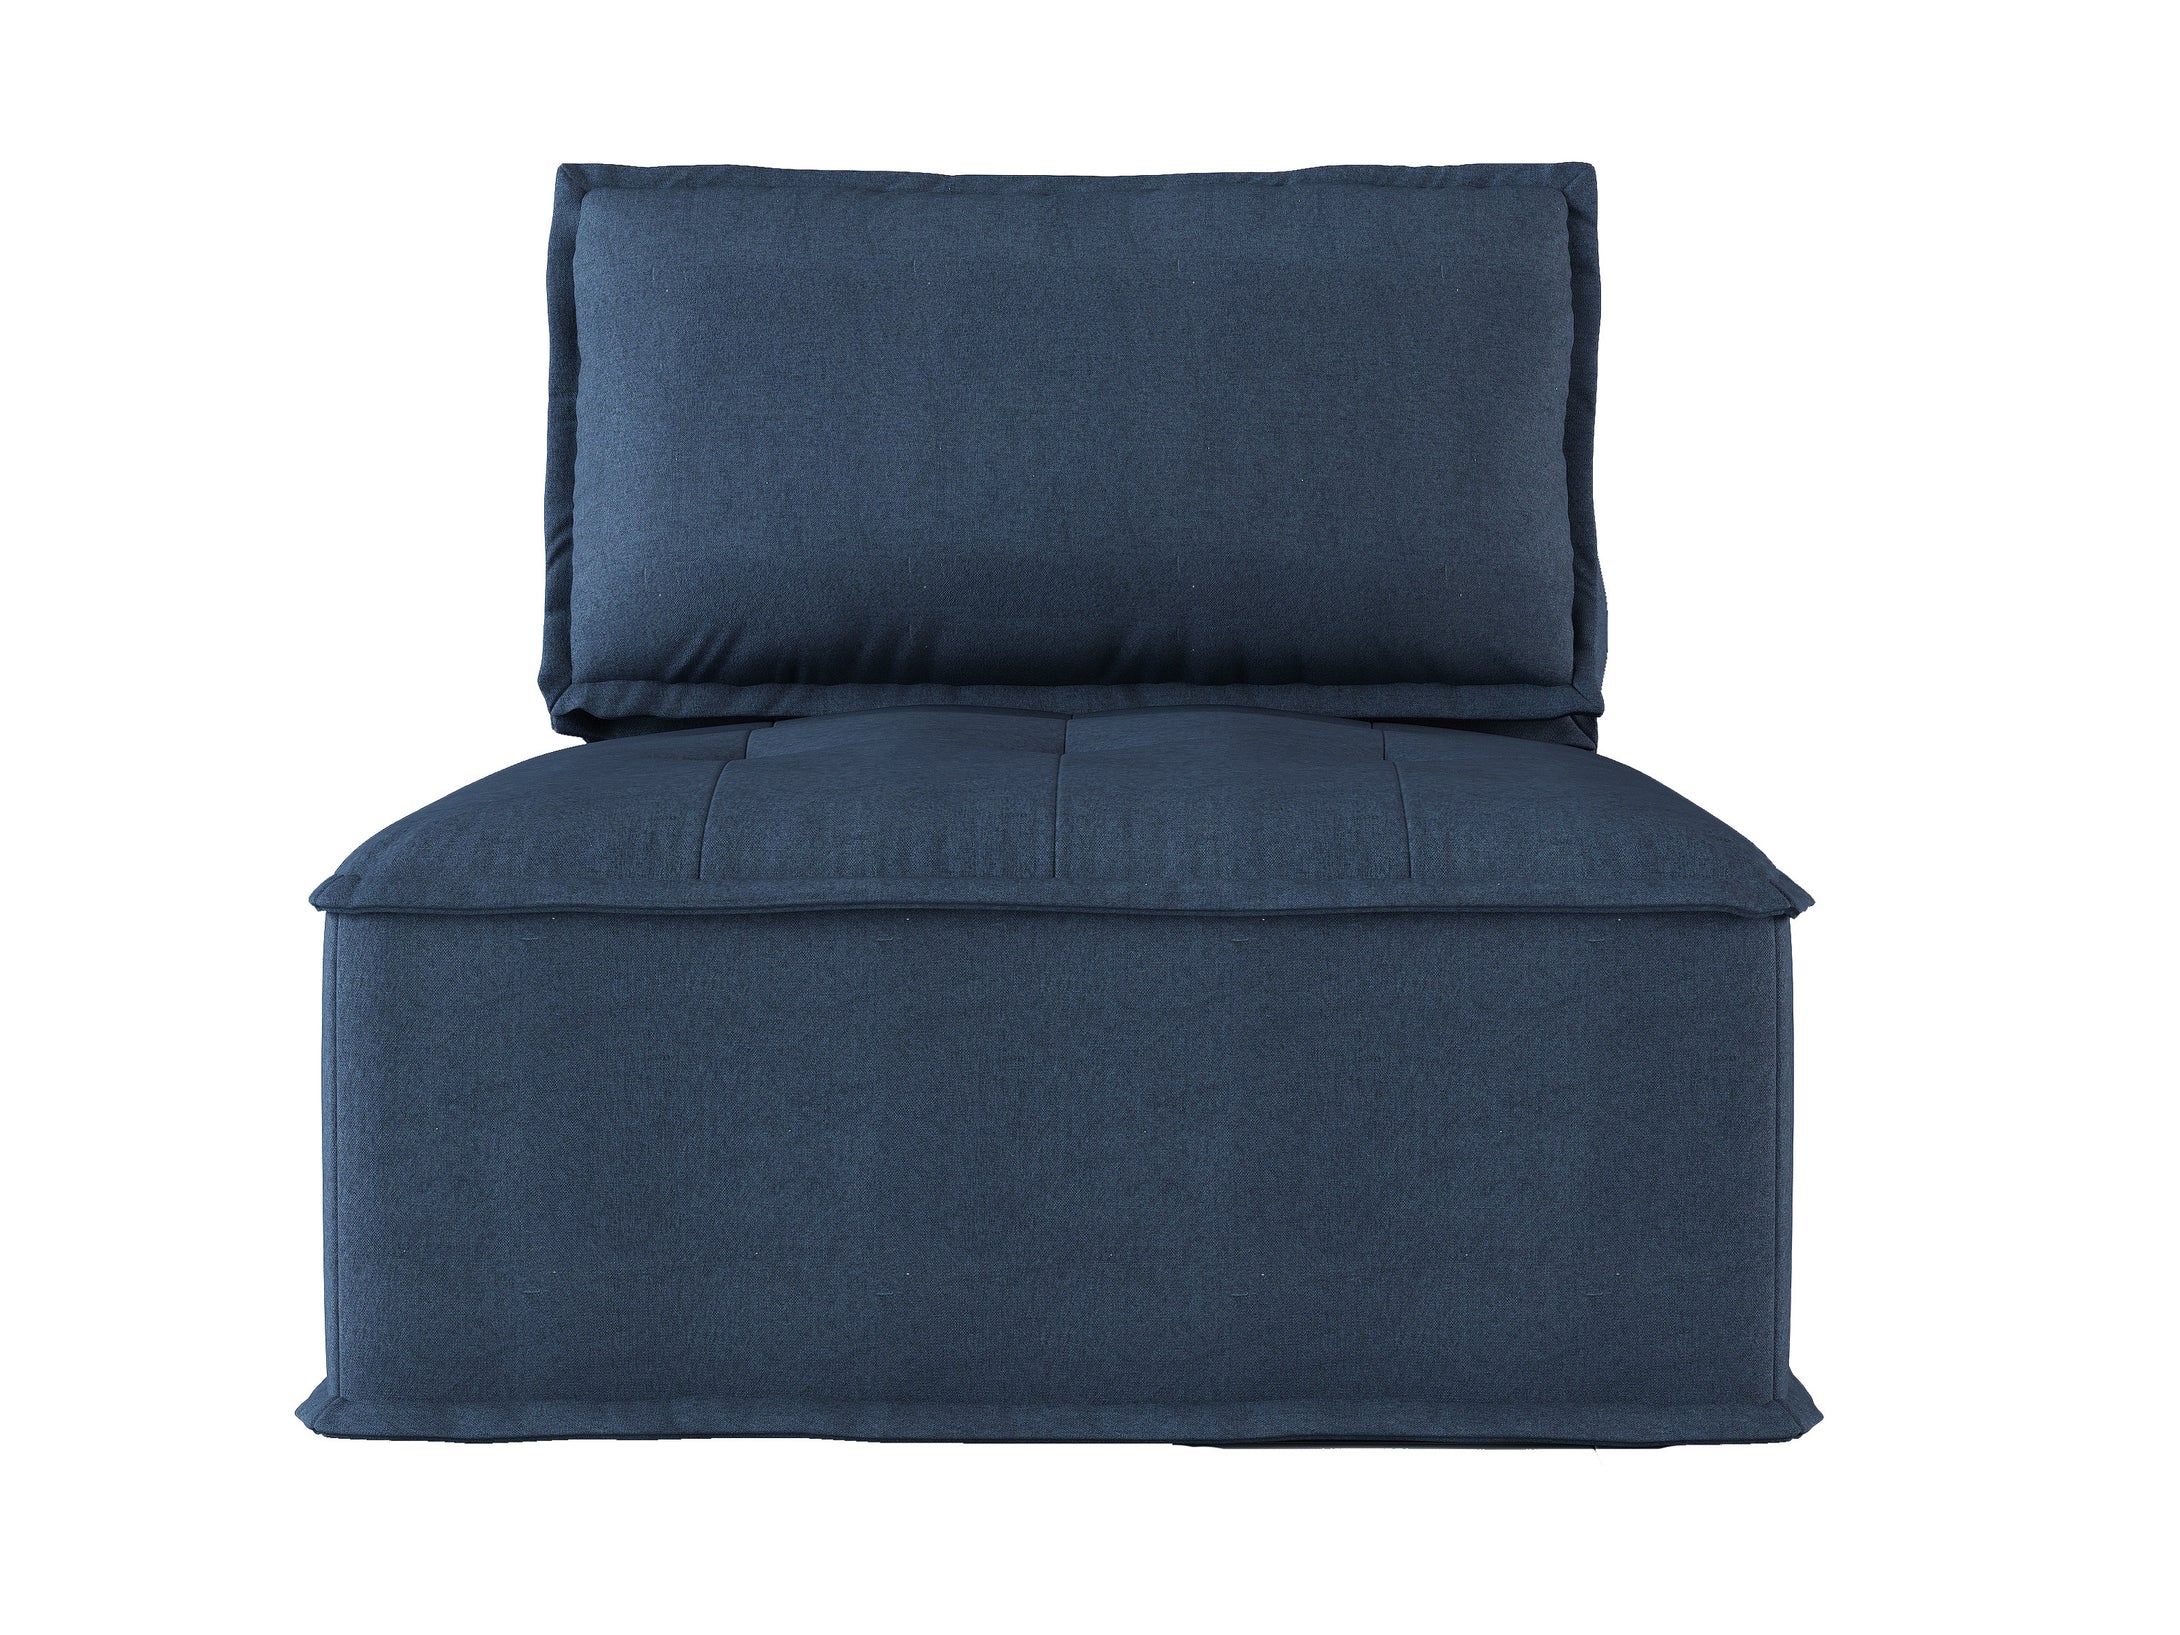 9545BU-1 Modular Chair with Removable Bolster and Pillow